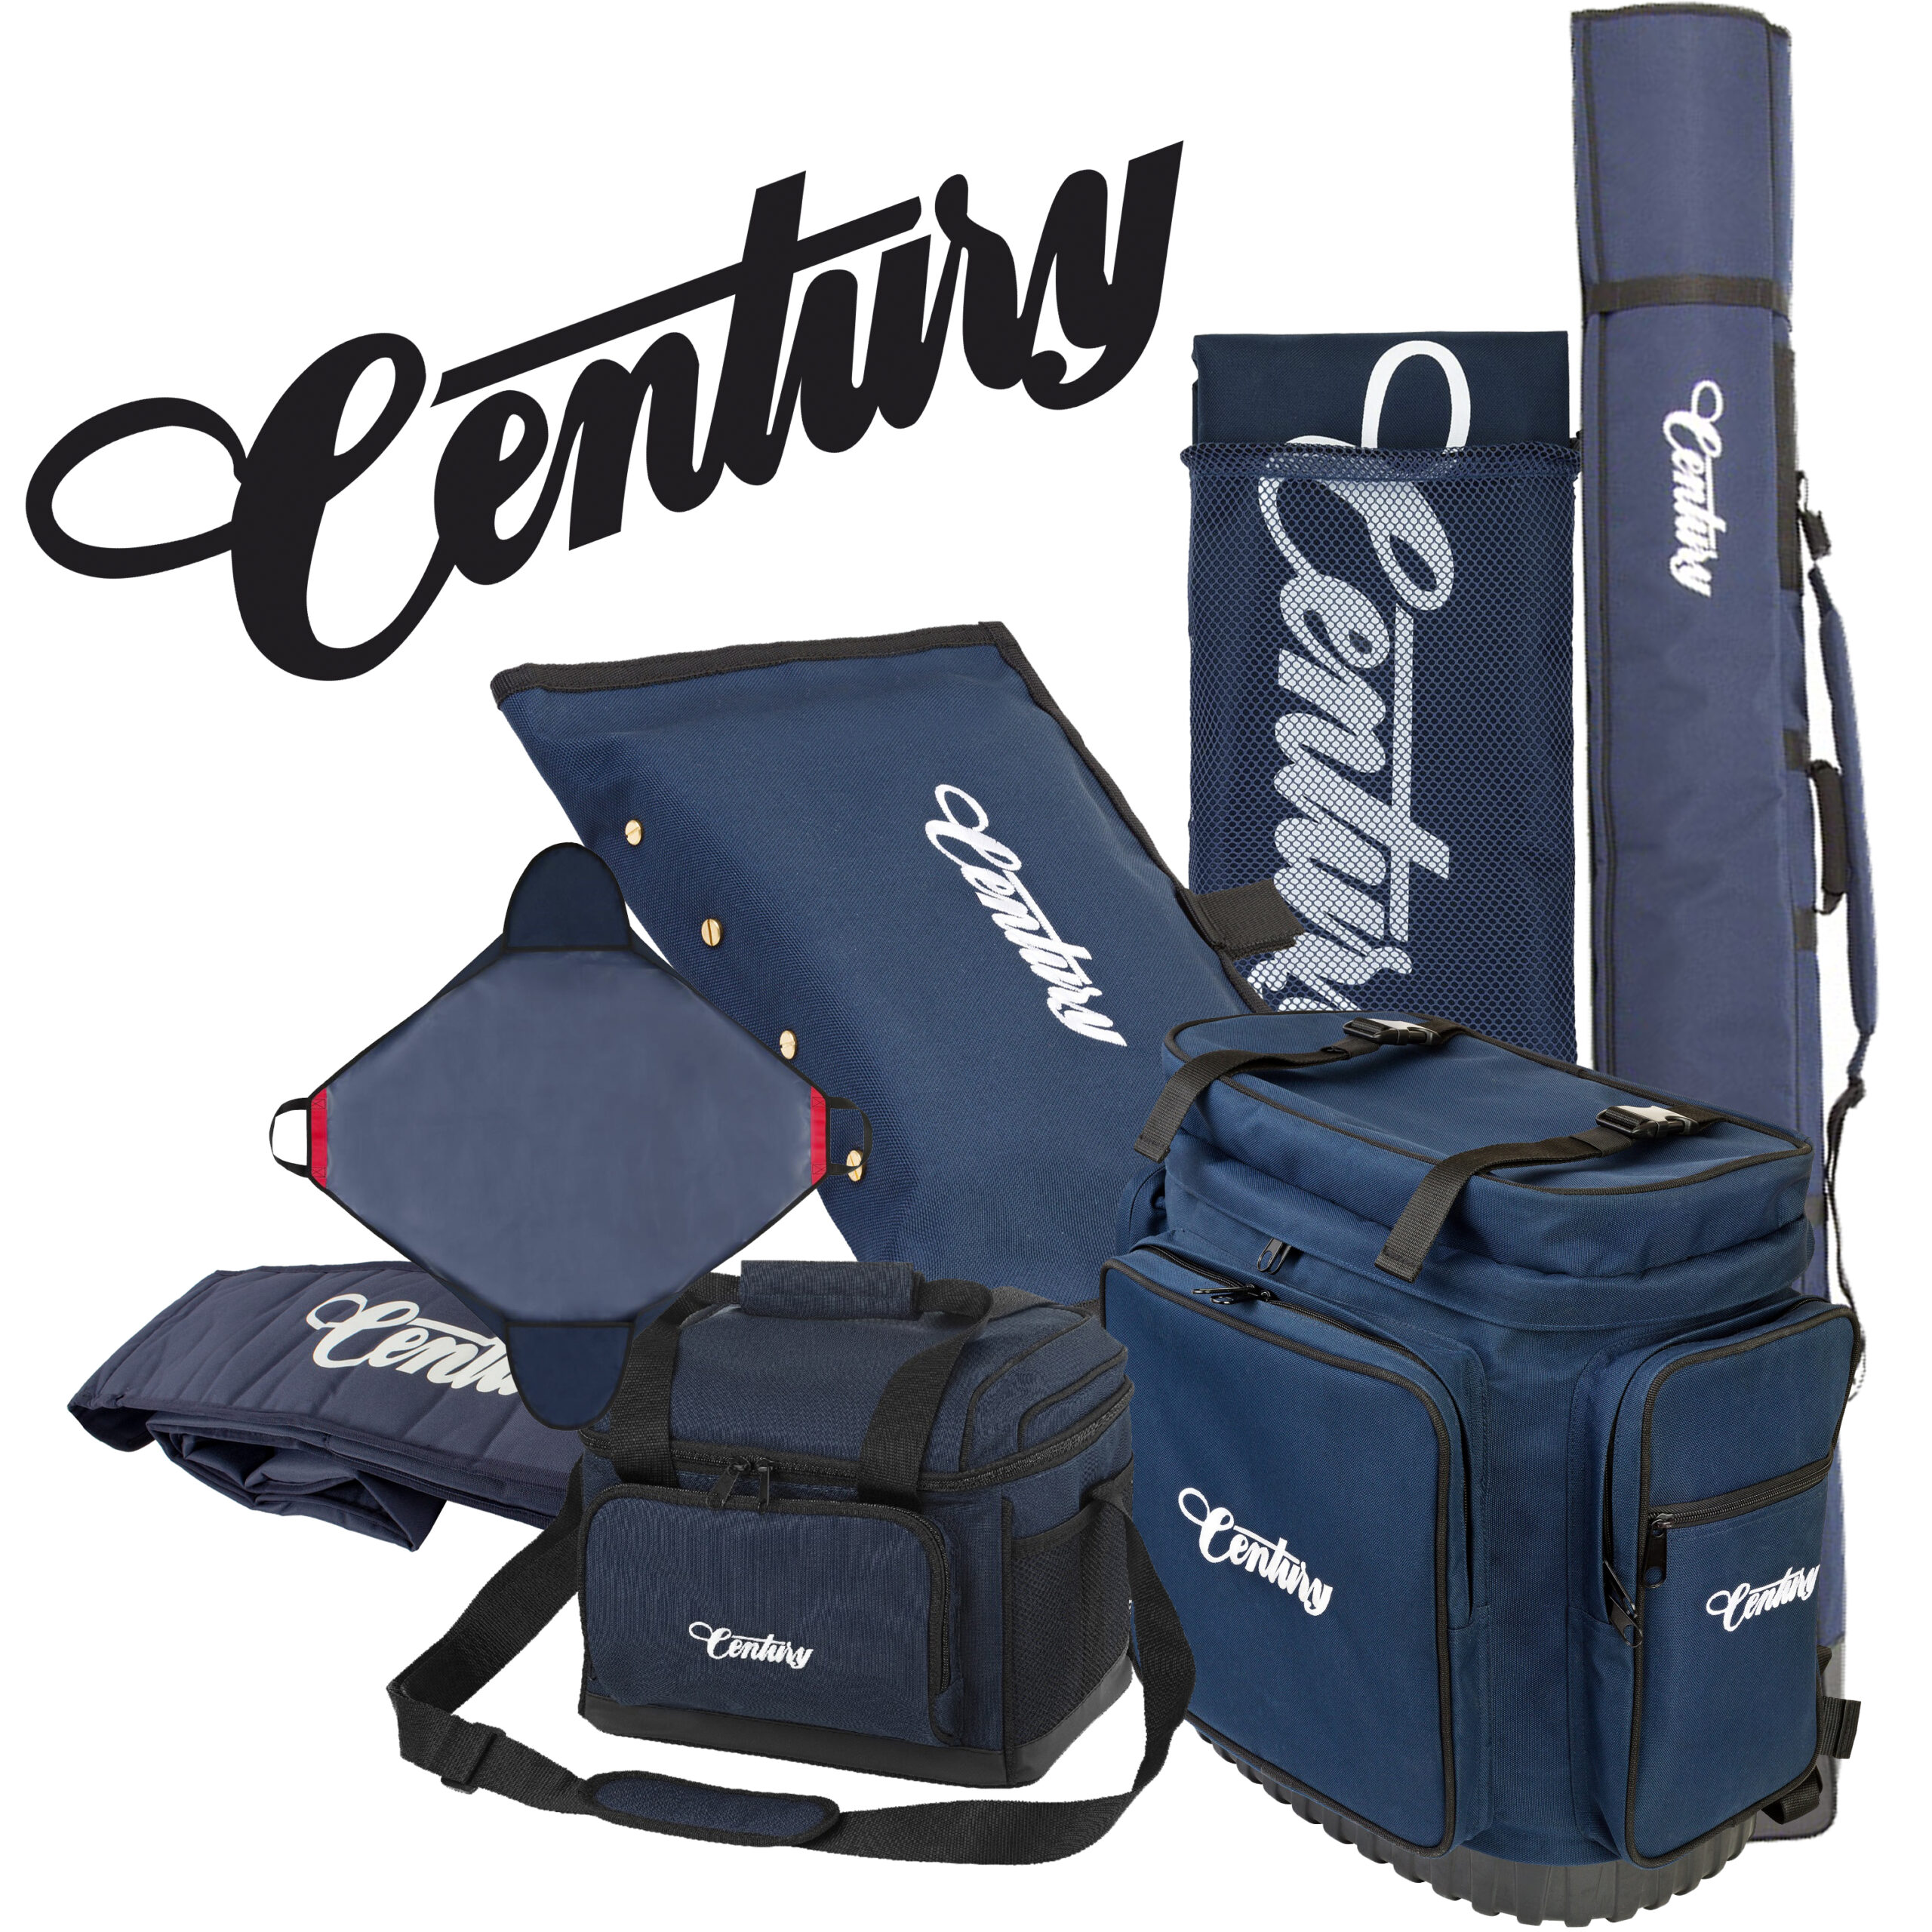 Century luggage- practical, functional and stylish! - Veals Mail Order